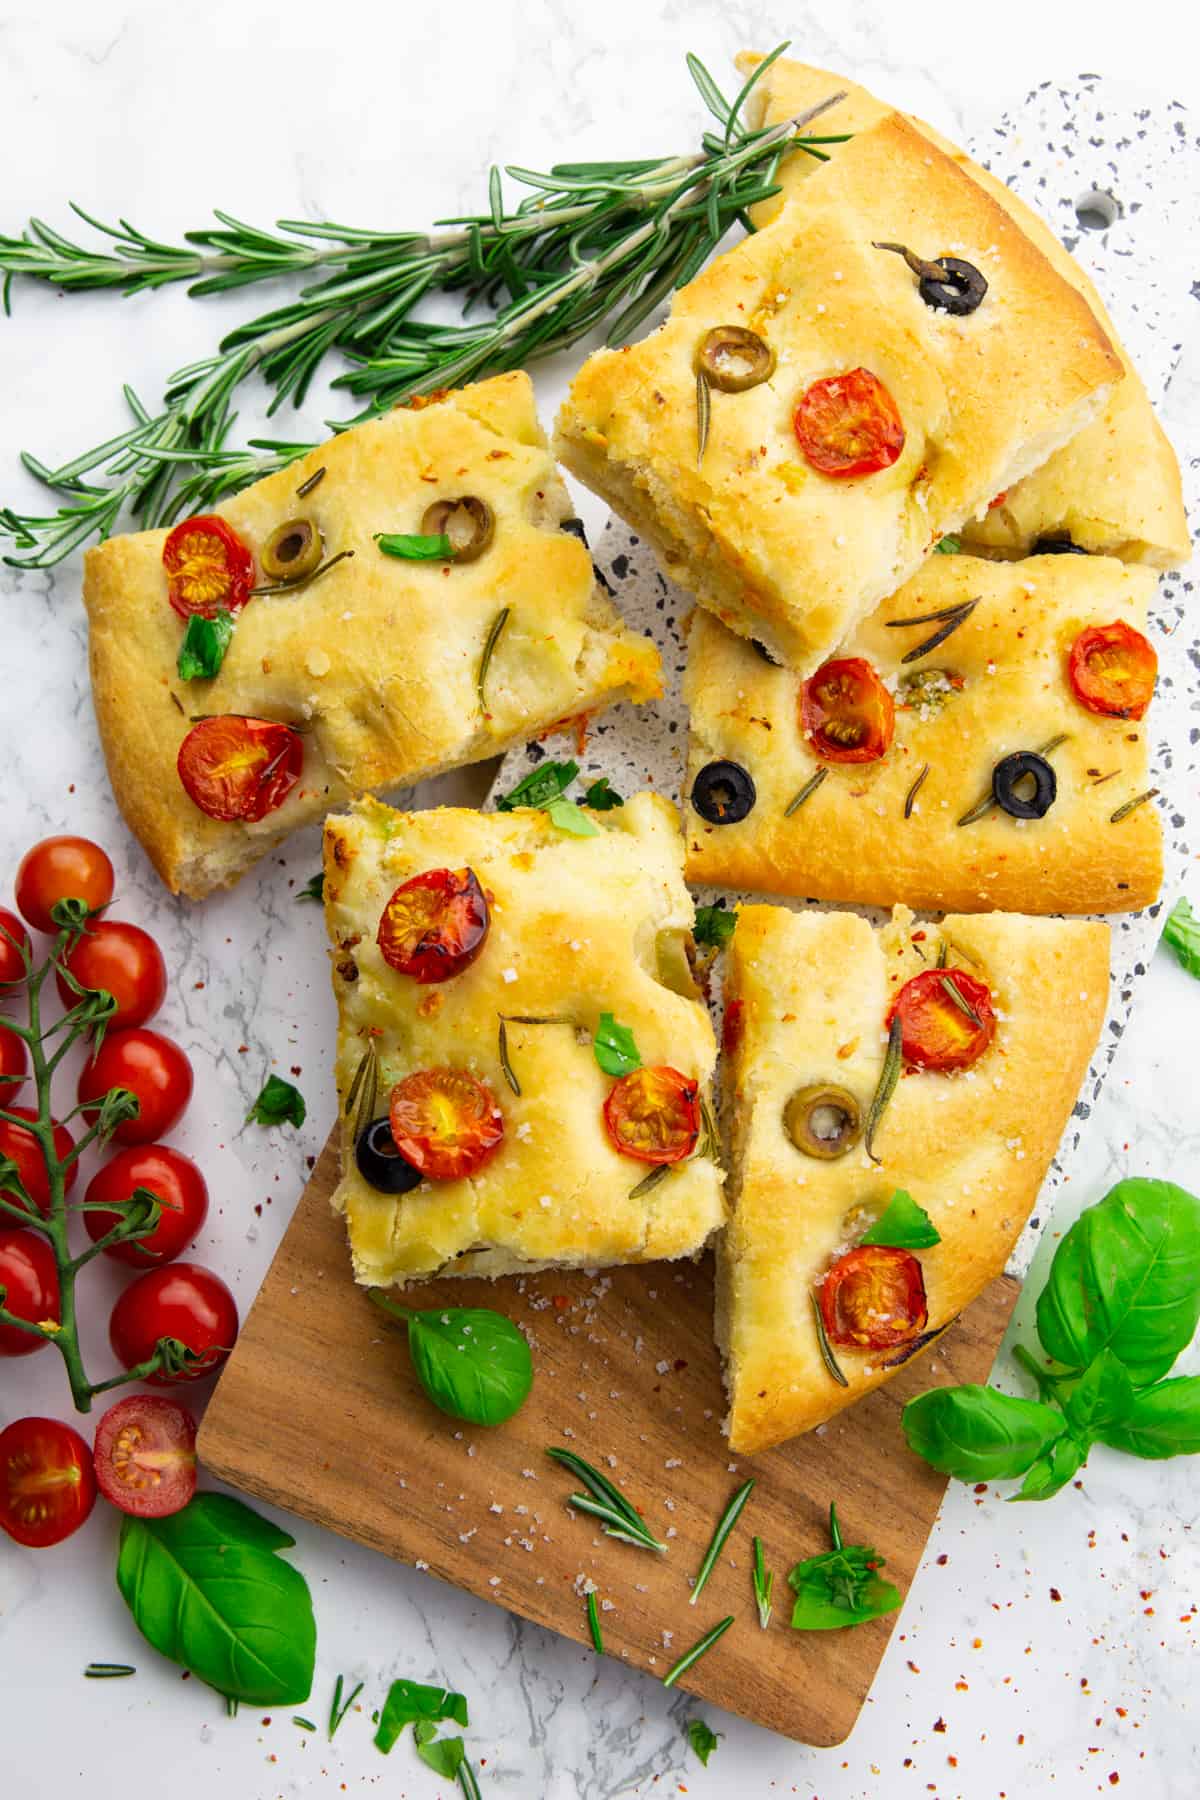 Focaccia squares on a wooden board with cherry tomatoes, rosemary, and basil on the side